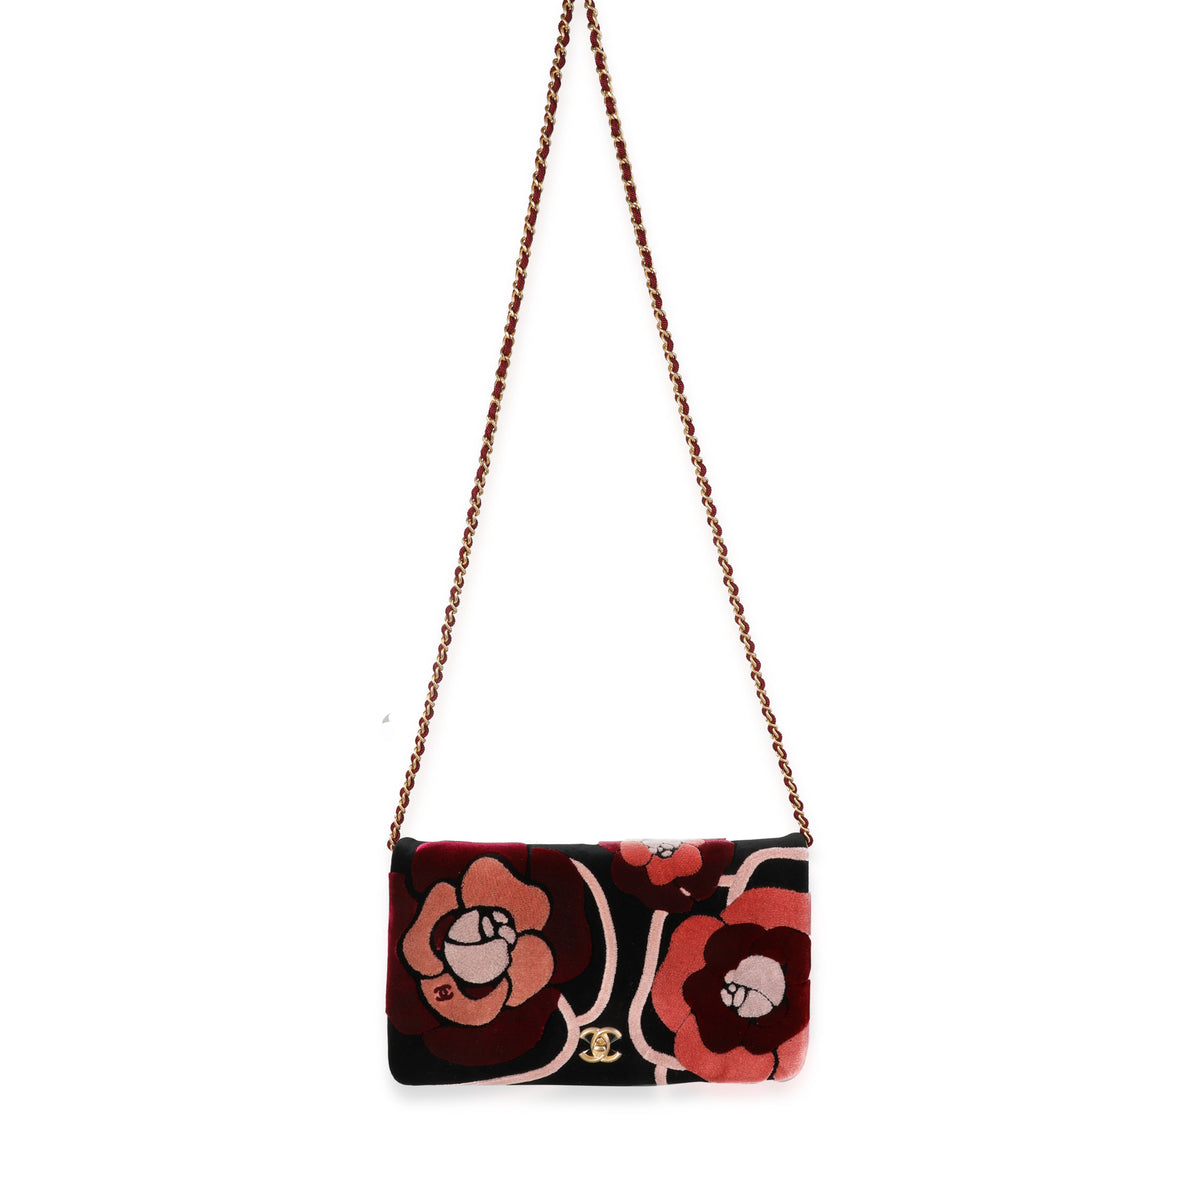 Chanel Black, Pink, & Red Velvet Camellia Clutch with Chain